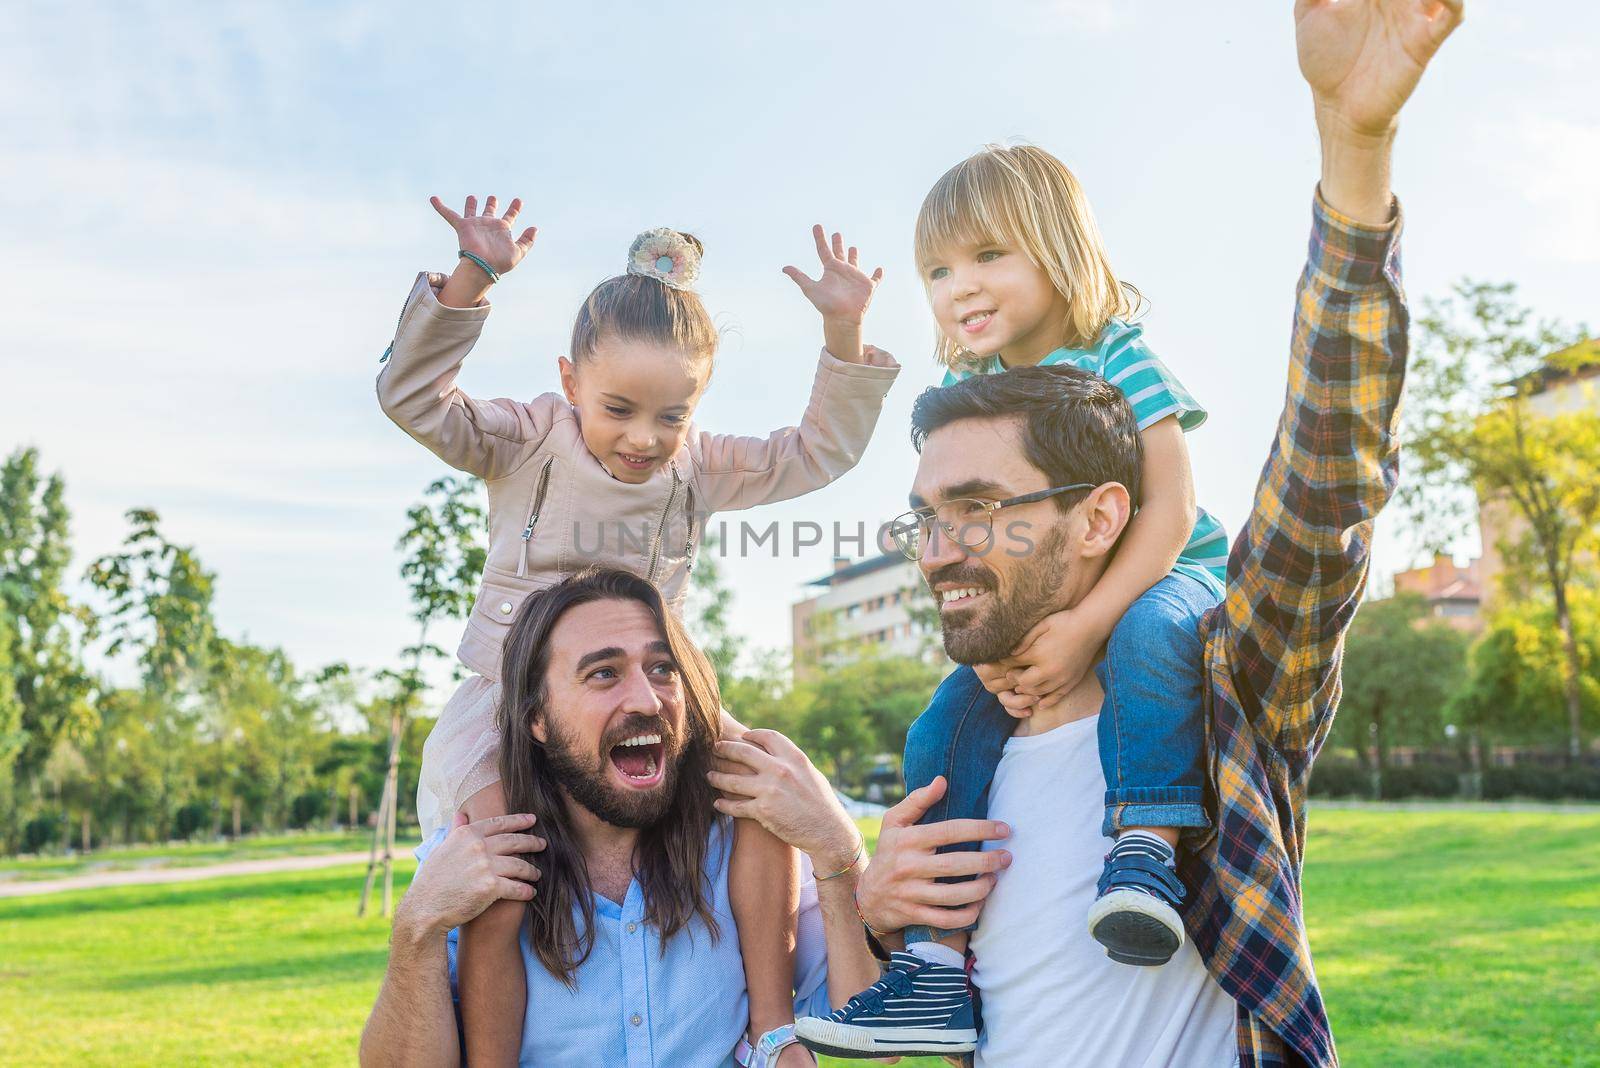 Two joyful caucasian dads holding their young children on their shoulders in the park in a sunny day.